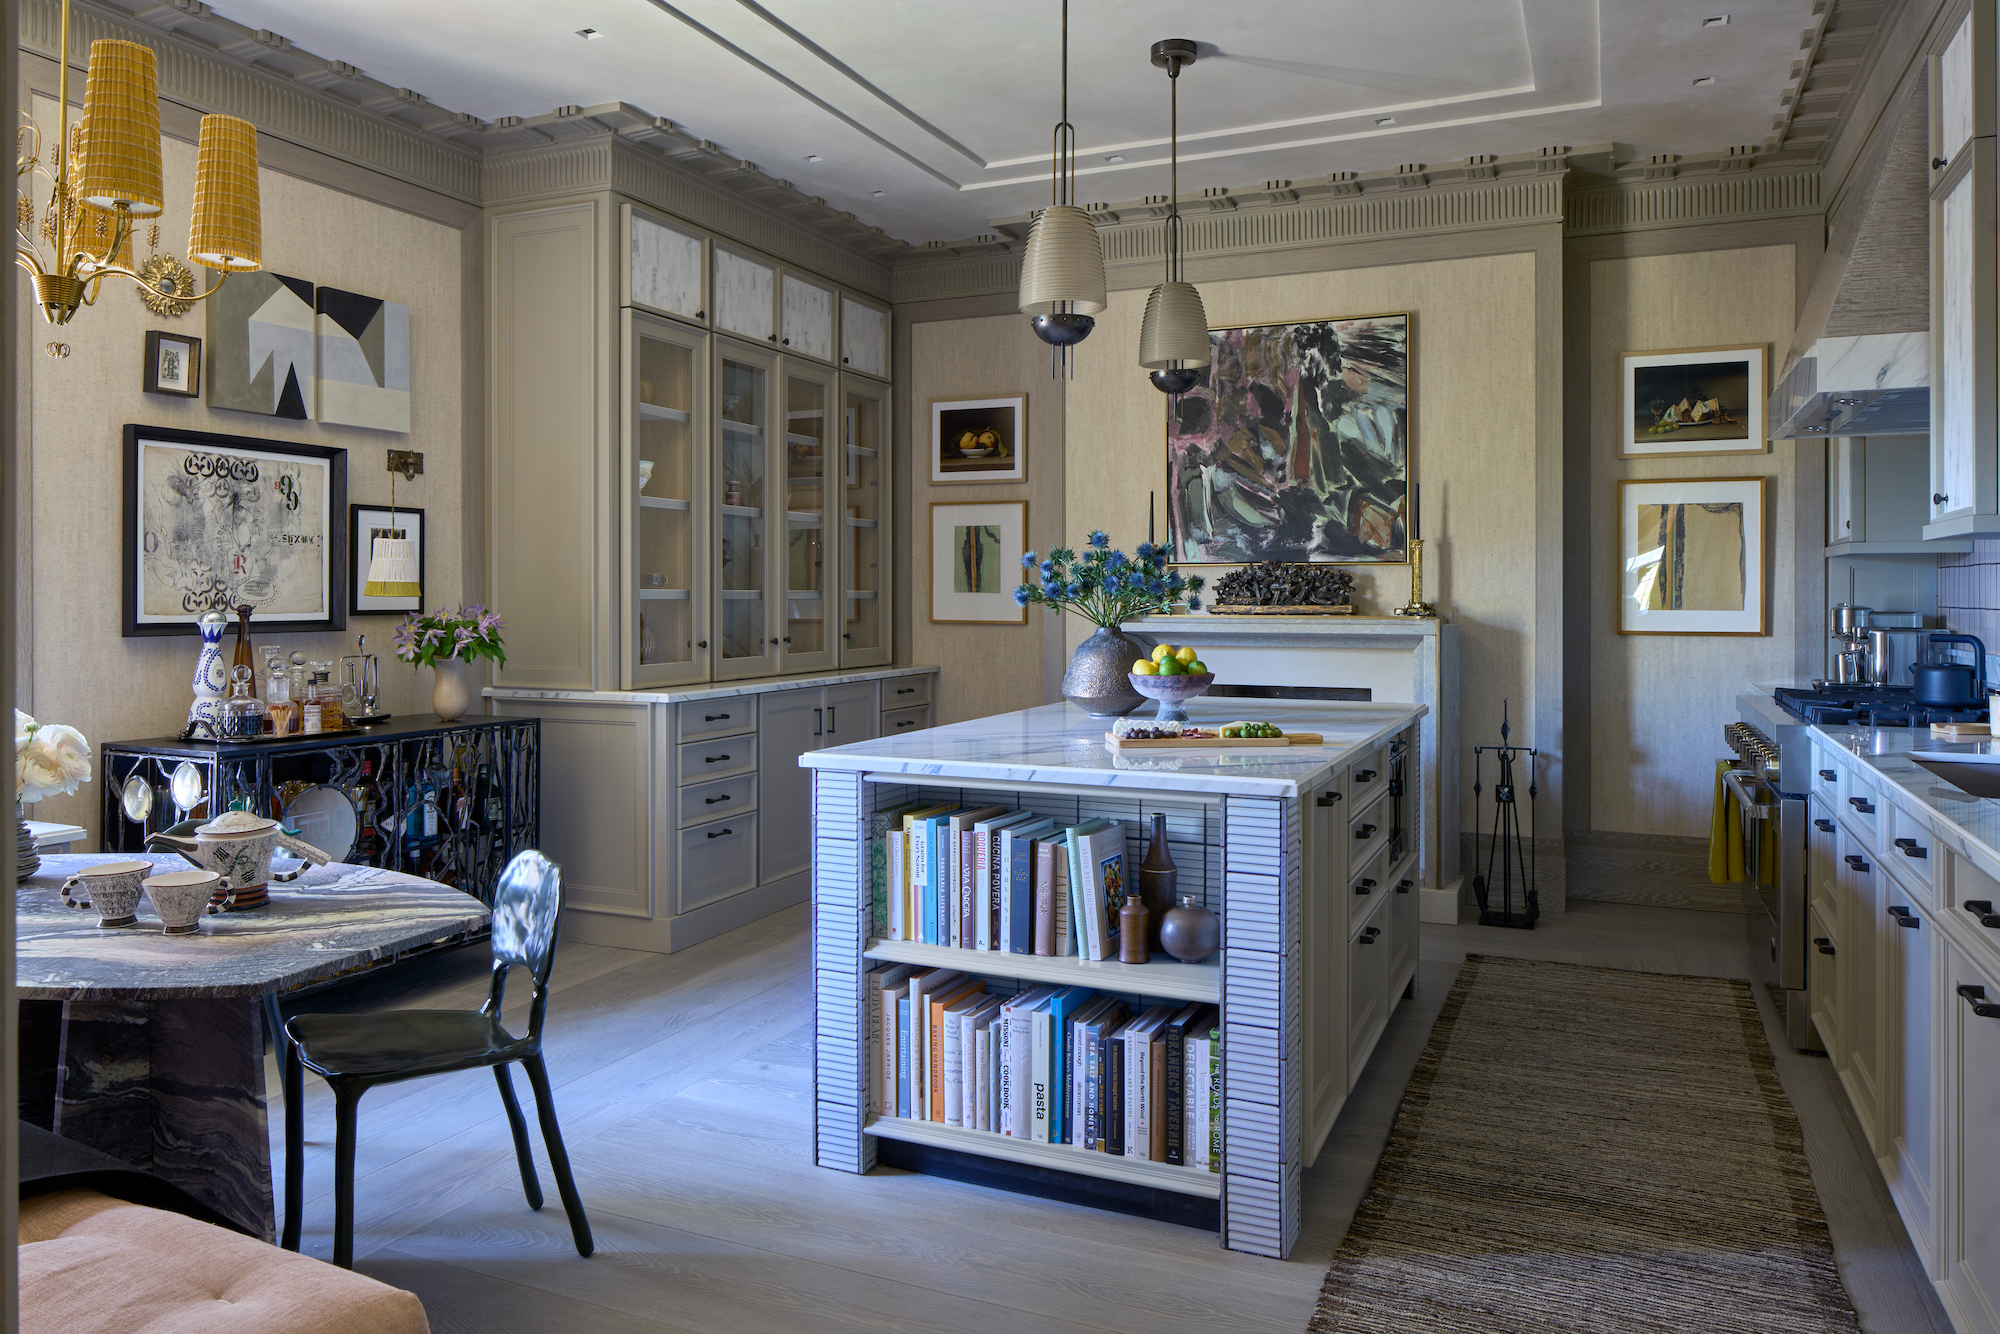 Wesley Moon’s kitchen instal for Kips Bay Decorator Show House New York 2023 included custom plaster mouldings adn louvered tiles from Ann Sacks - Effect Magazine